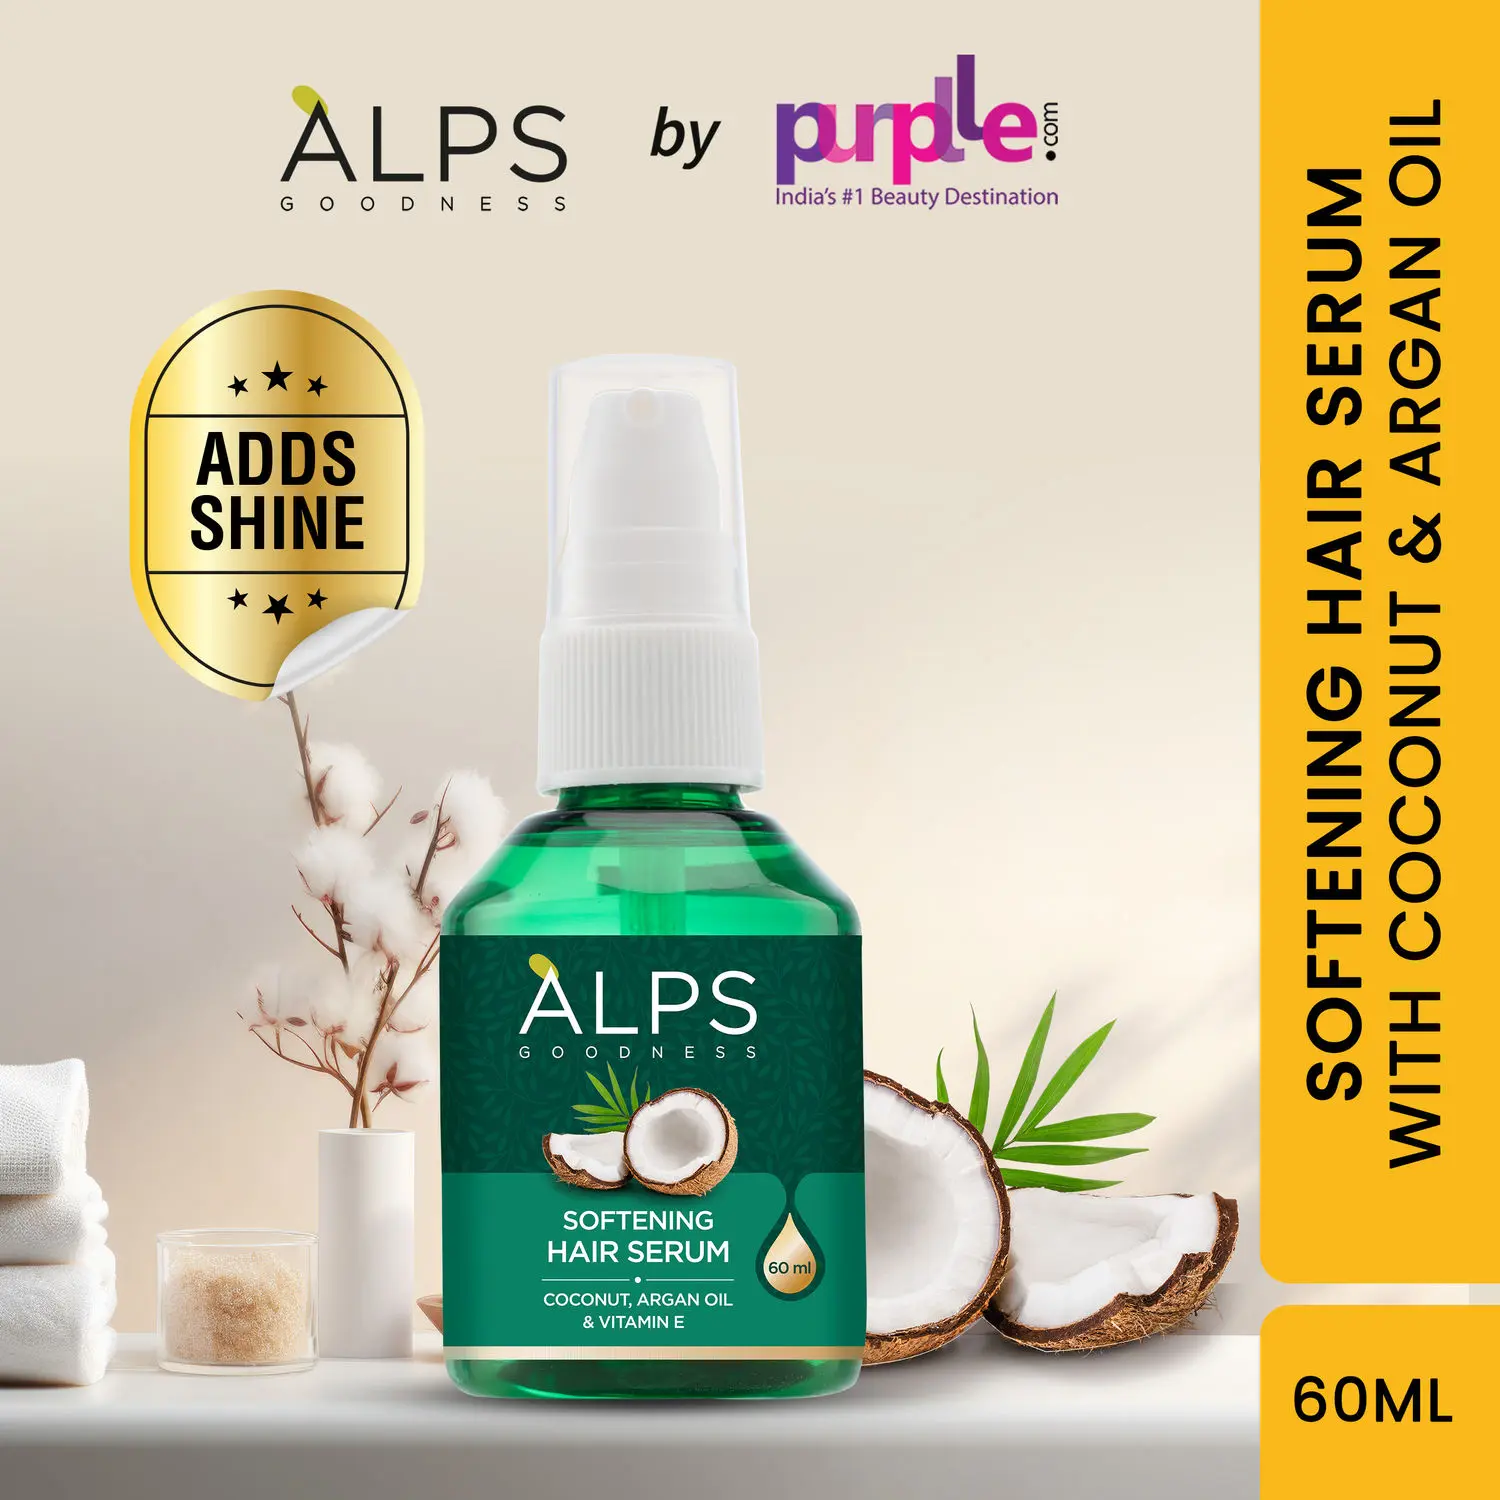 Alps Goodness Softening Hair Serum with Coconut, Argan Oil & Vitamin E (60ml) | For Soft & Frizz-Free Hair | Hair Serum for Smoothening | Adds Shine